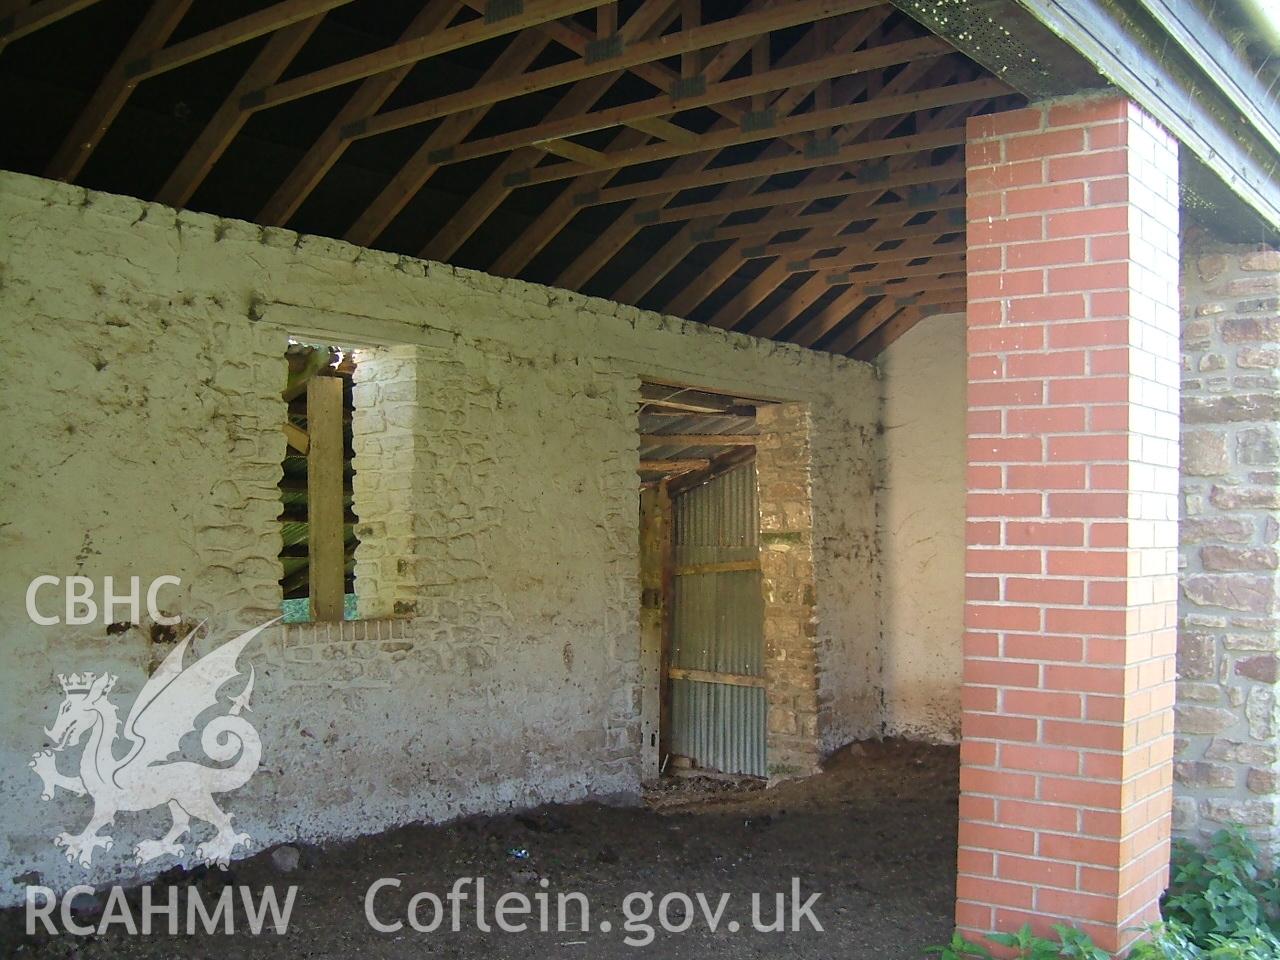 Colour digital photgraph of barn from an Archaeological Building Recording of Hillside Barn, Llanvaches, Monmouthshire, which was conducted by Cambrian Archaeological Projects.